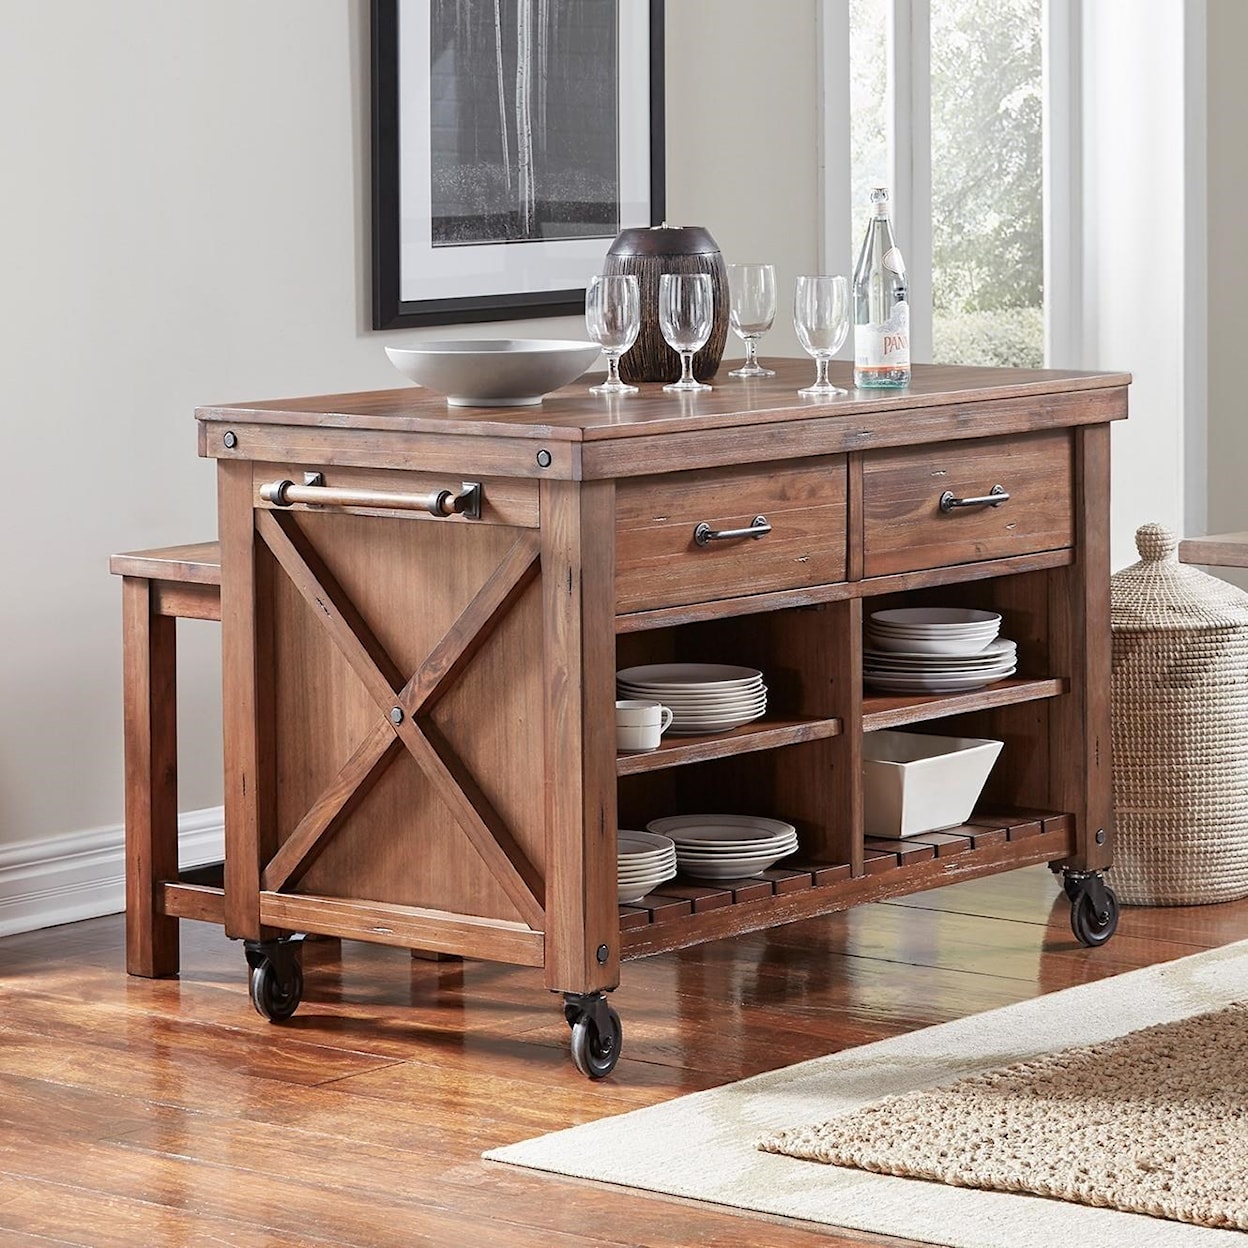 A-A Anacortes Kitchen Island with Wood Top